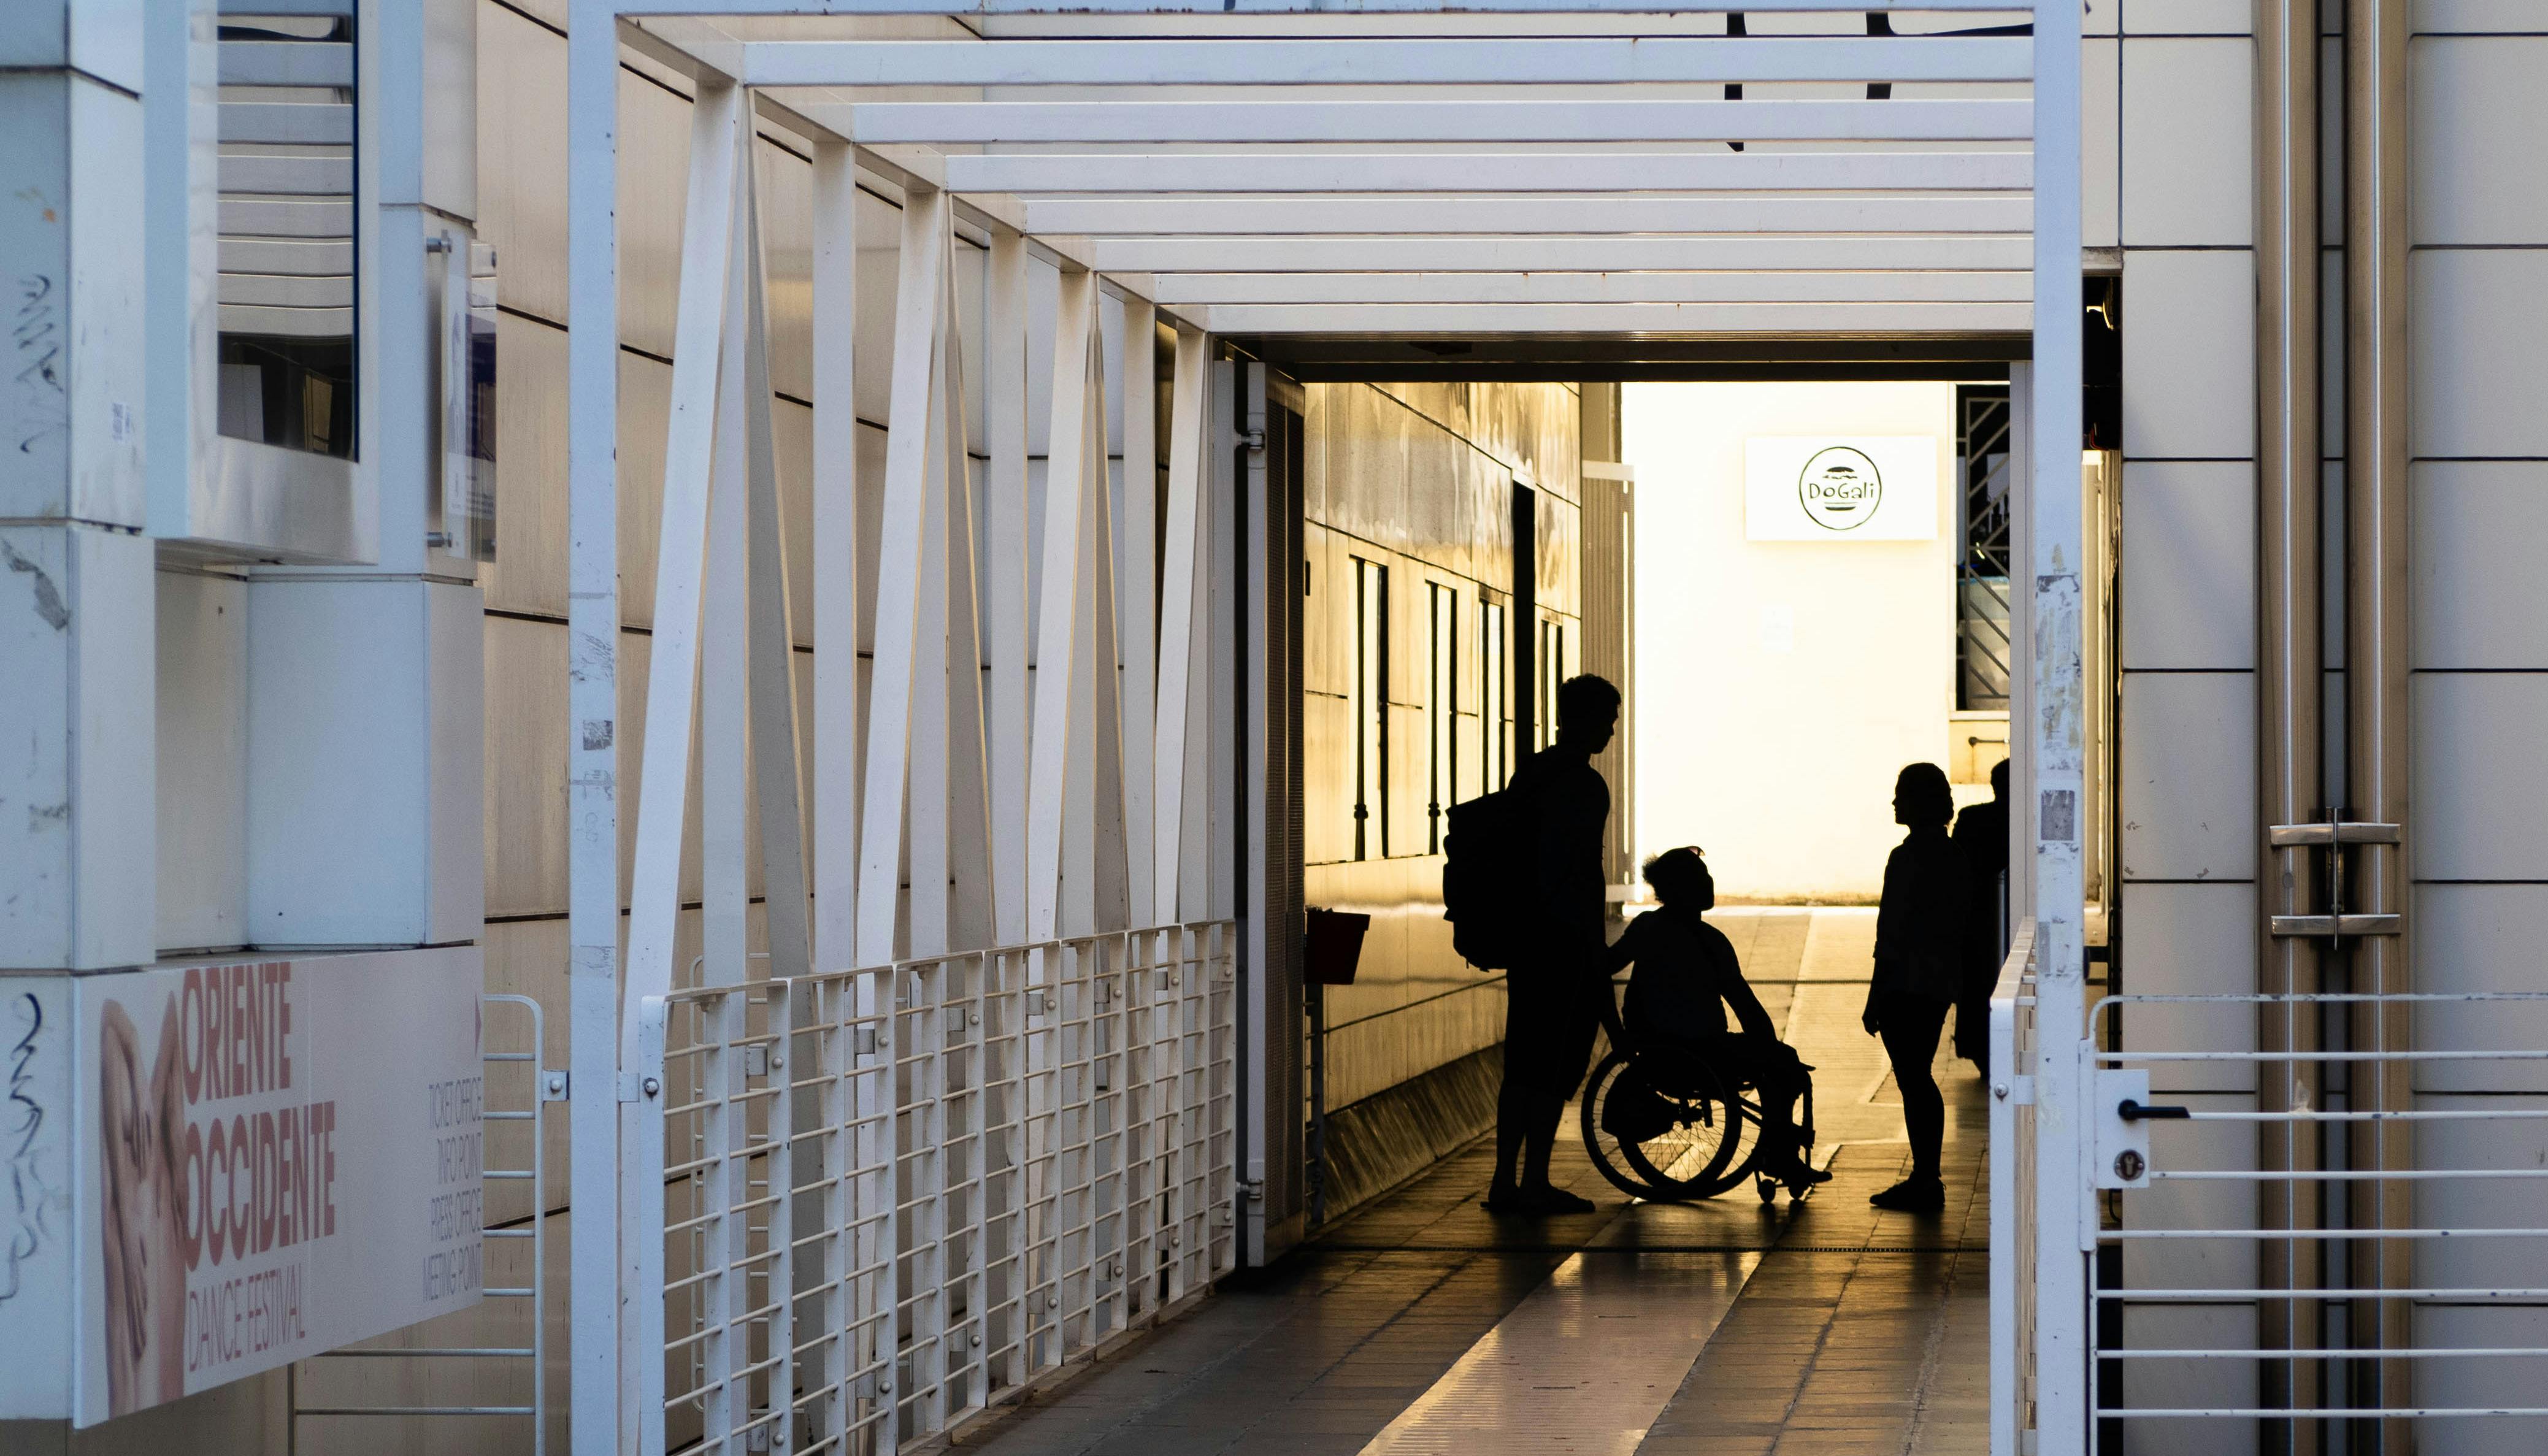 Entrance of Oriente Occidente. The silhouettes of three figures about to enter are shown in backlighting. One of the three is seated in a wheelchair.